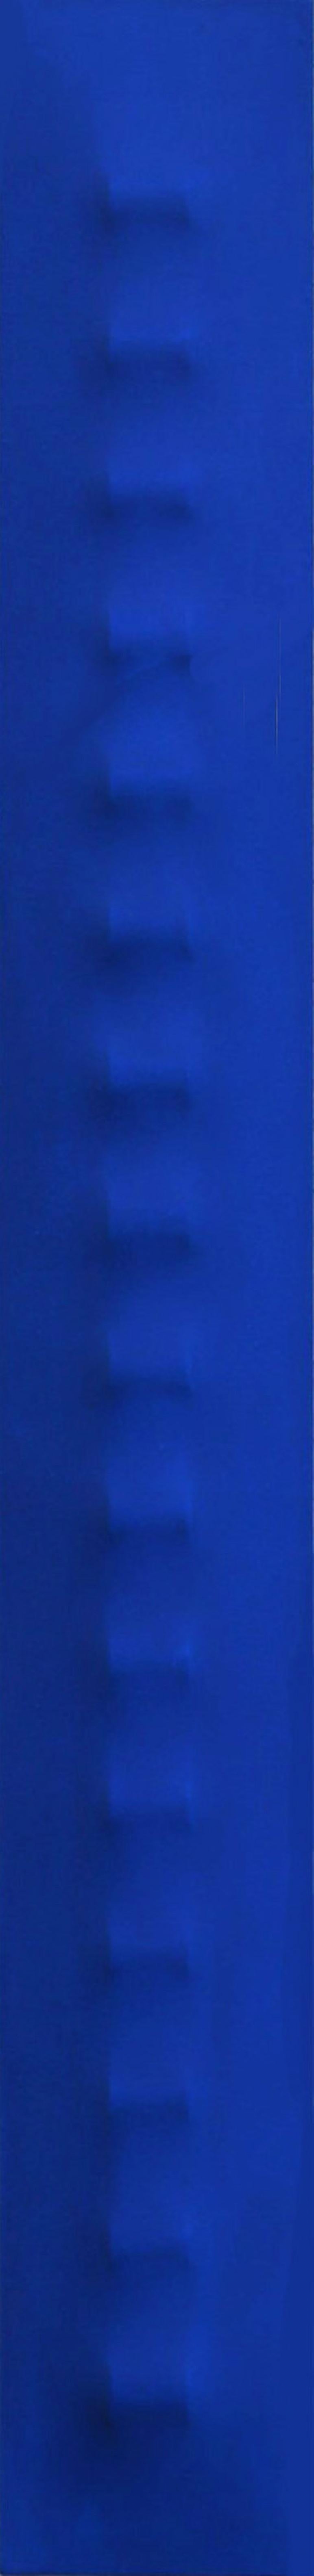 Slims CNB - Three-dimensional Minimalist Blue Abstract Wall Painting